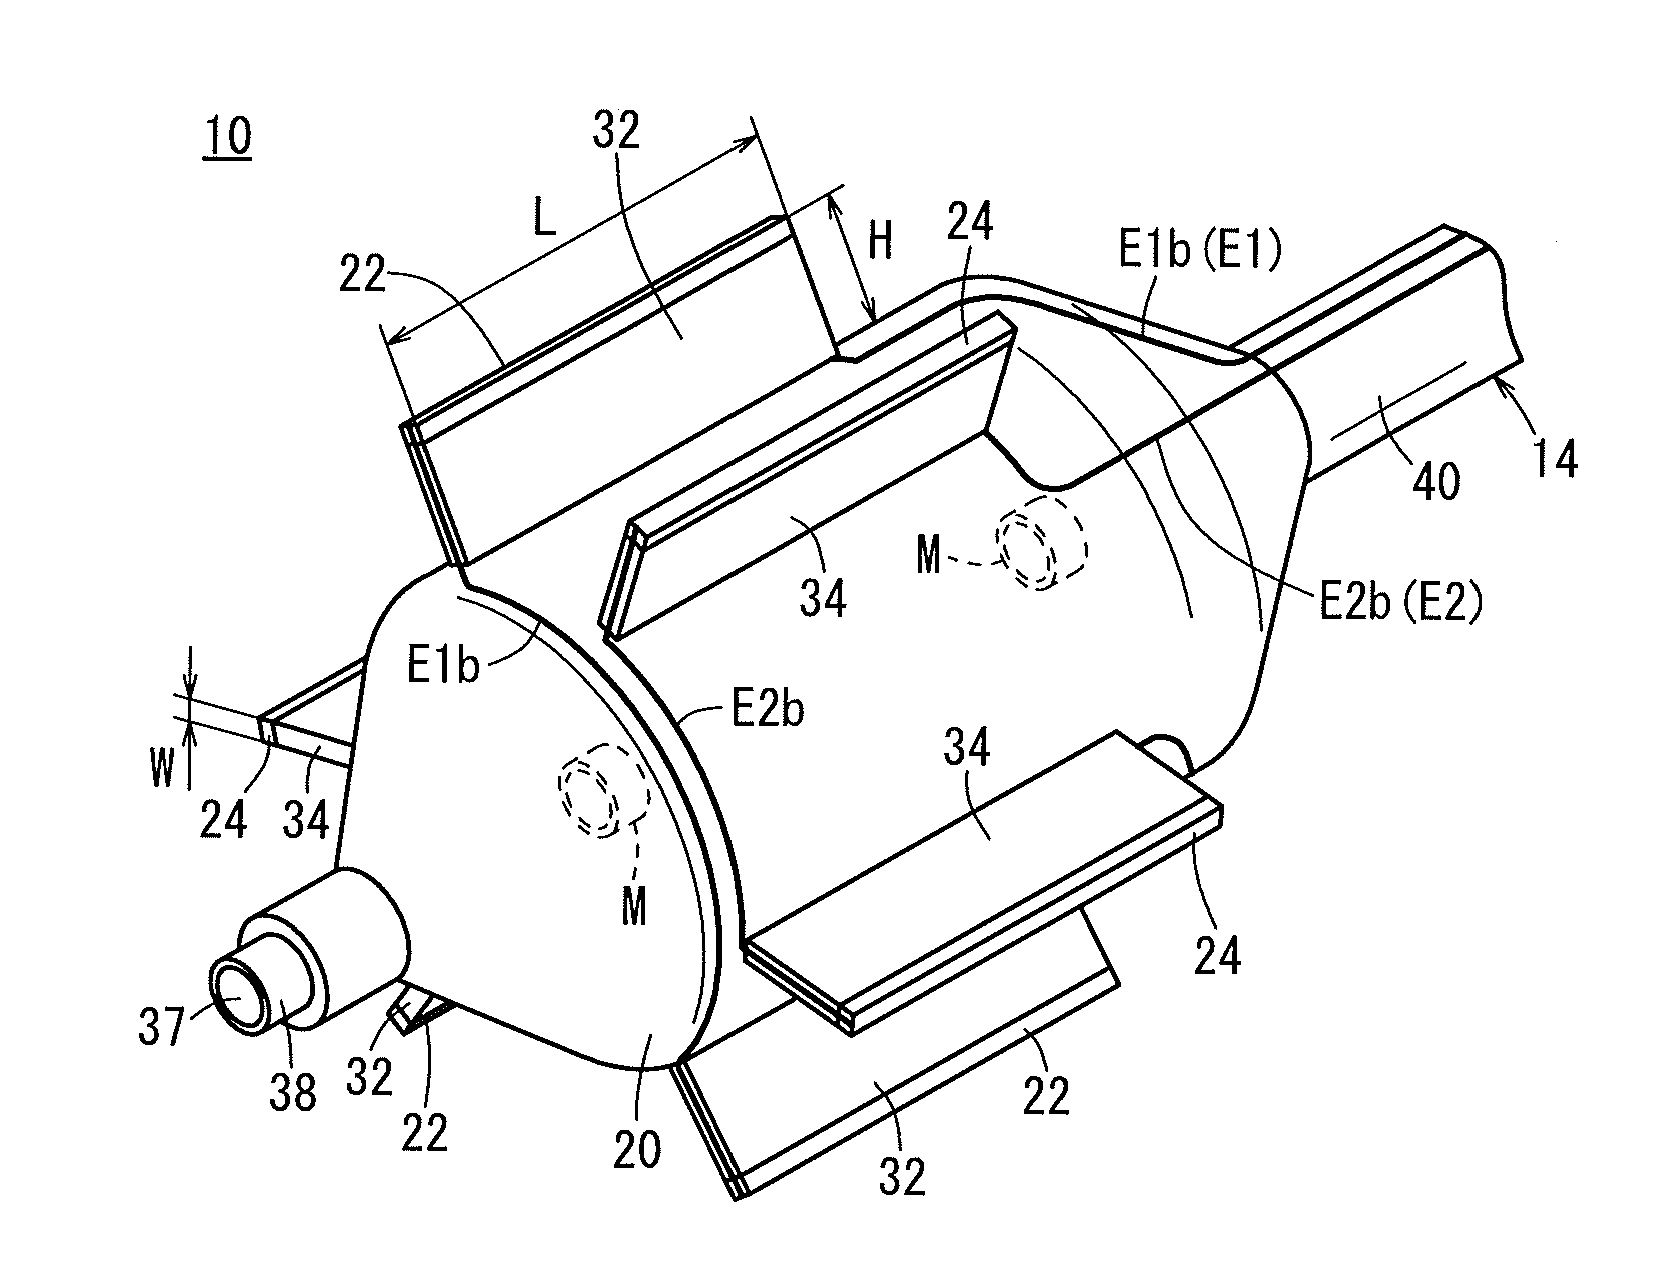 Balloon catheter and electrification system